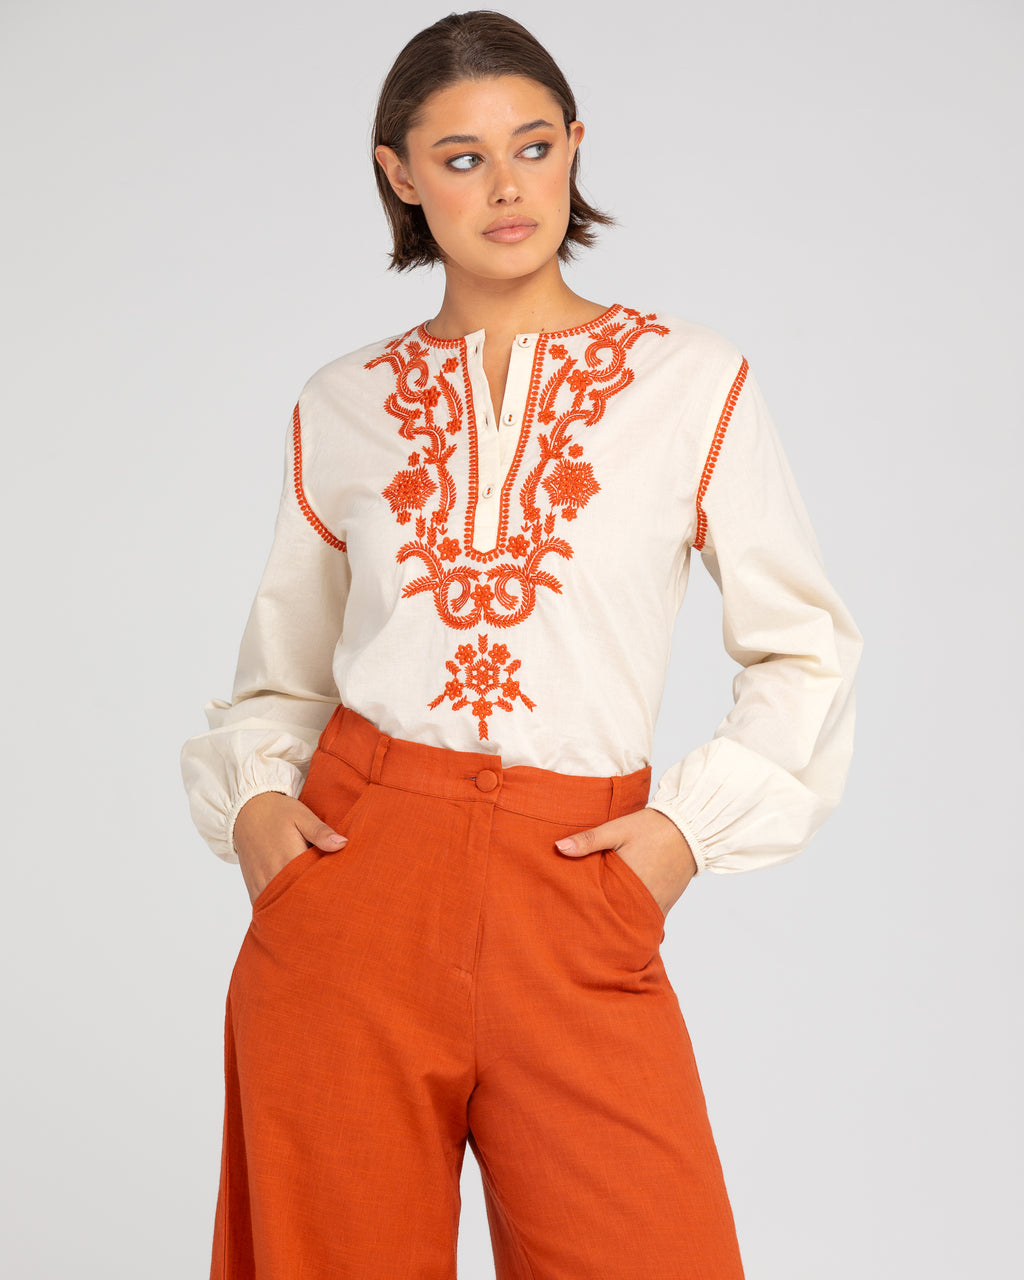 jadu top by boom shankar is a cream cotton ethical embroidered blouse with long sleeves